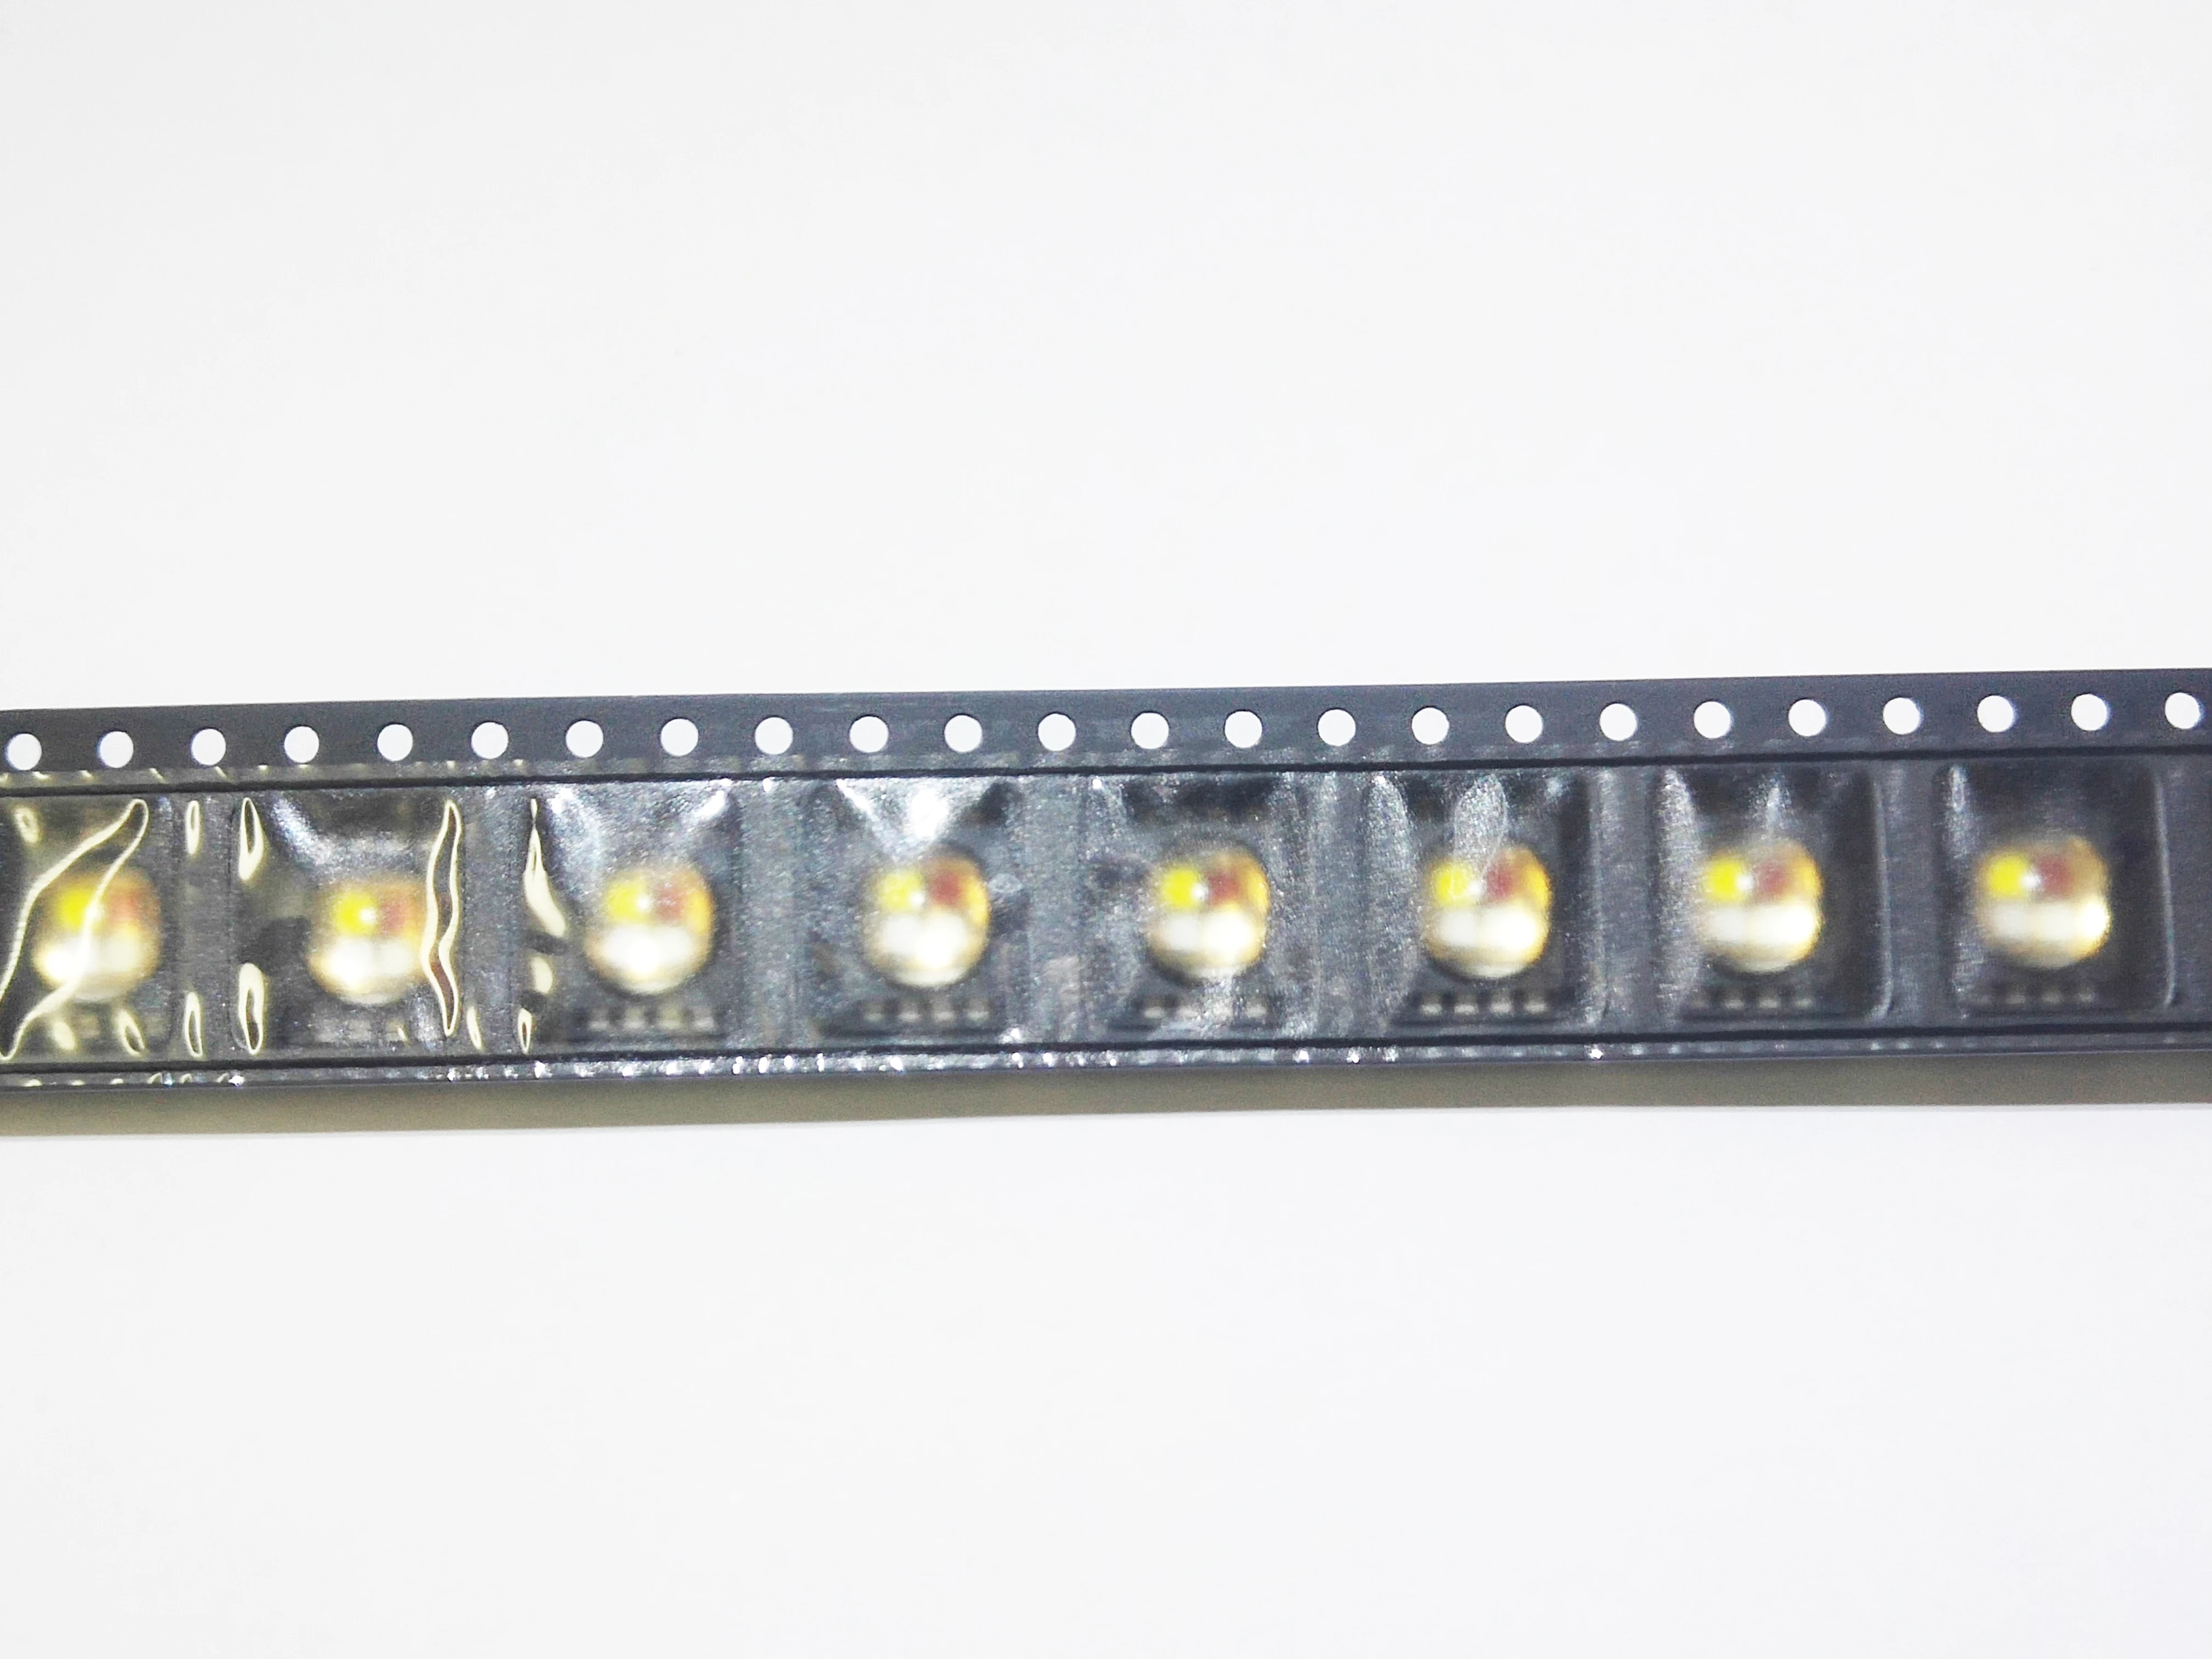 
New and Original MCE RGBW Series LED Chip RGBW LED Diode 